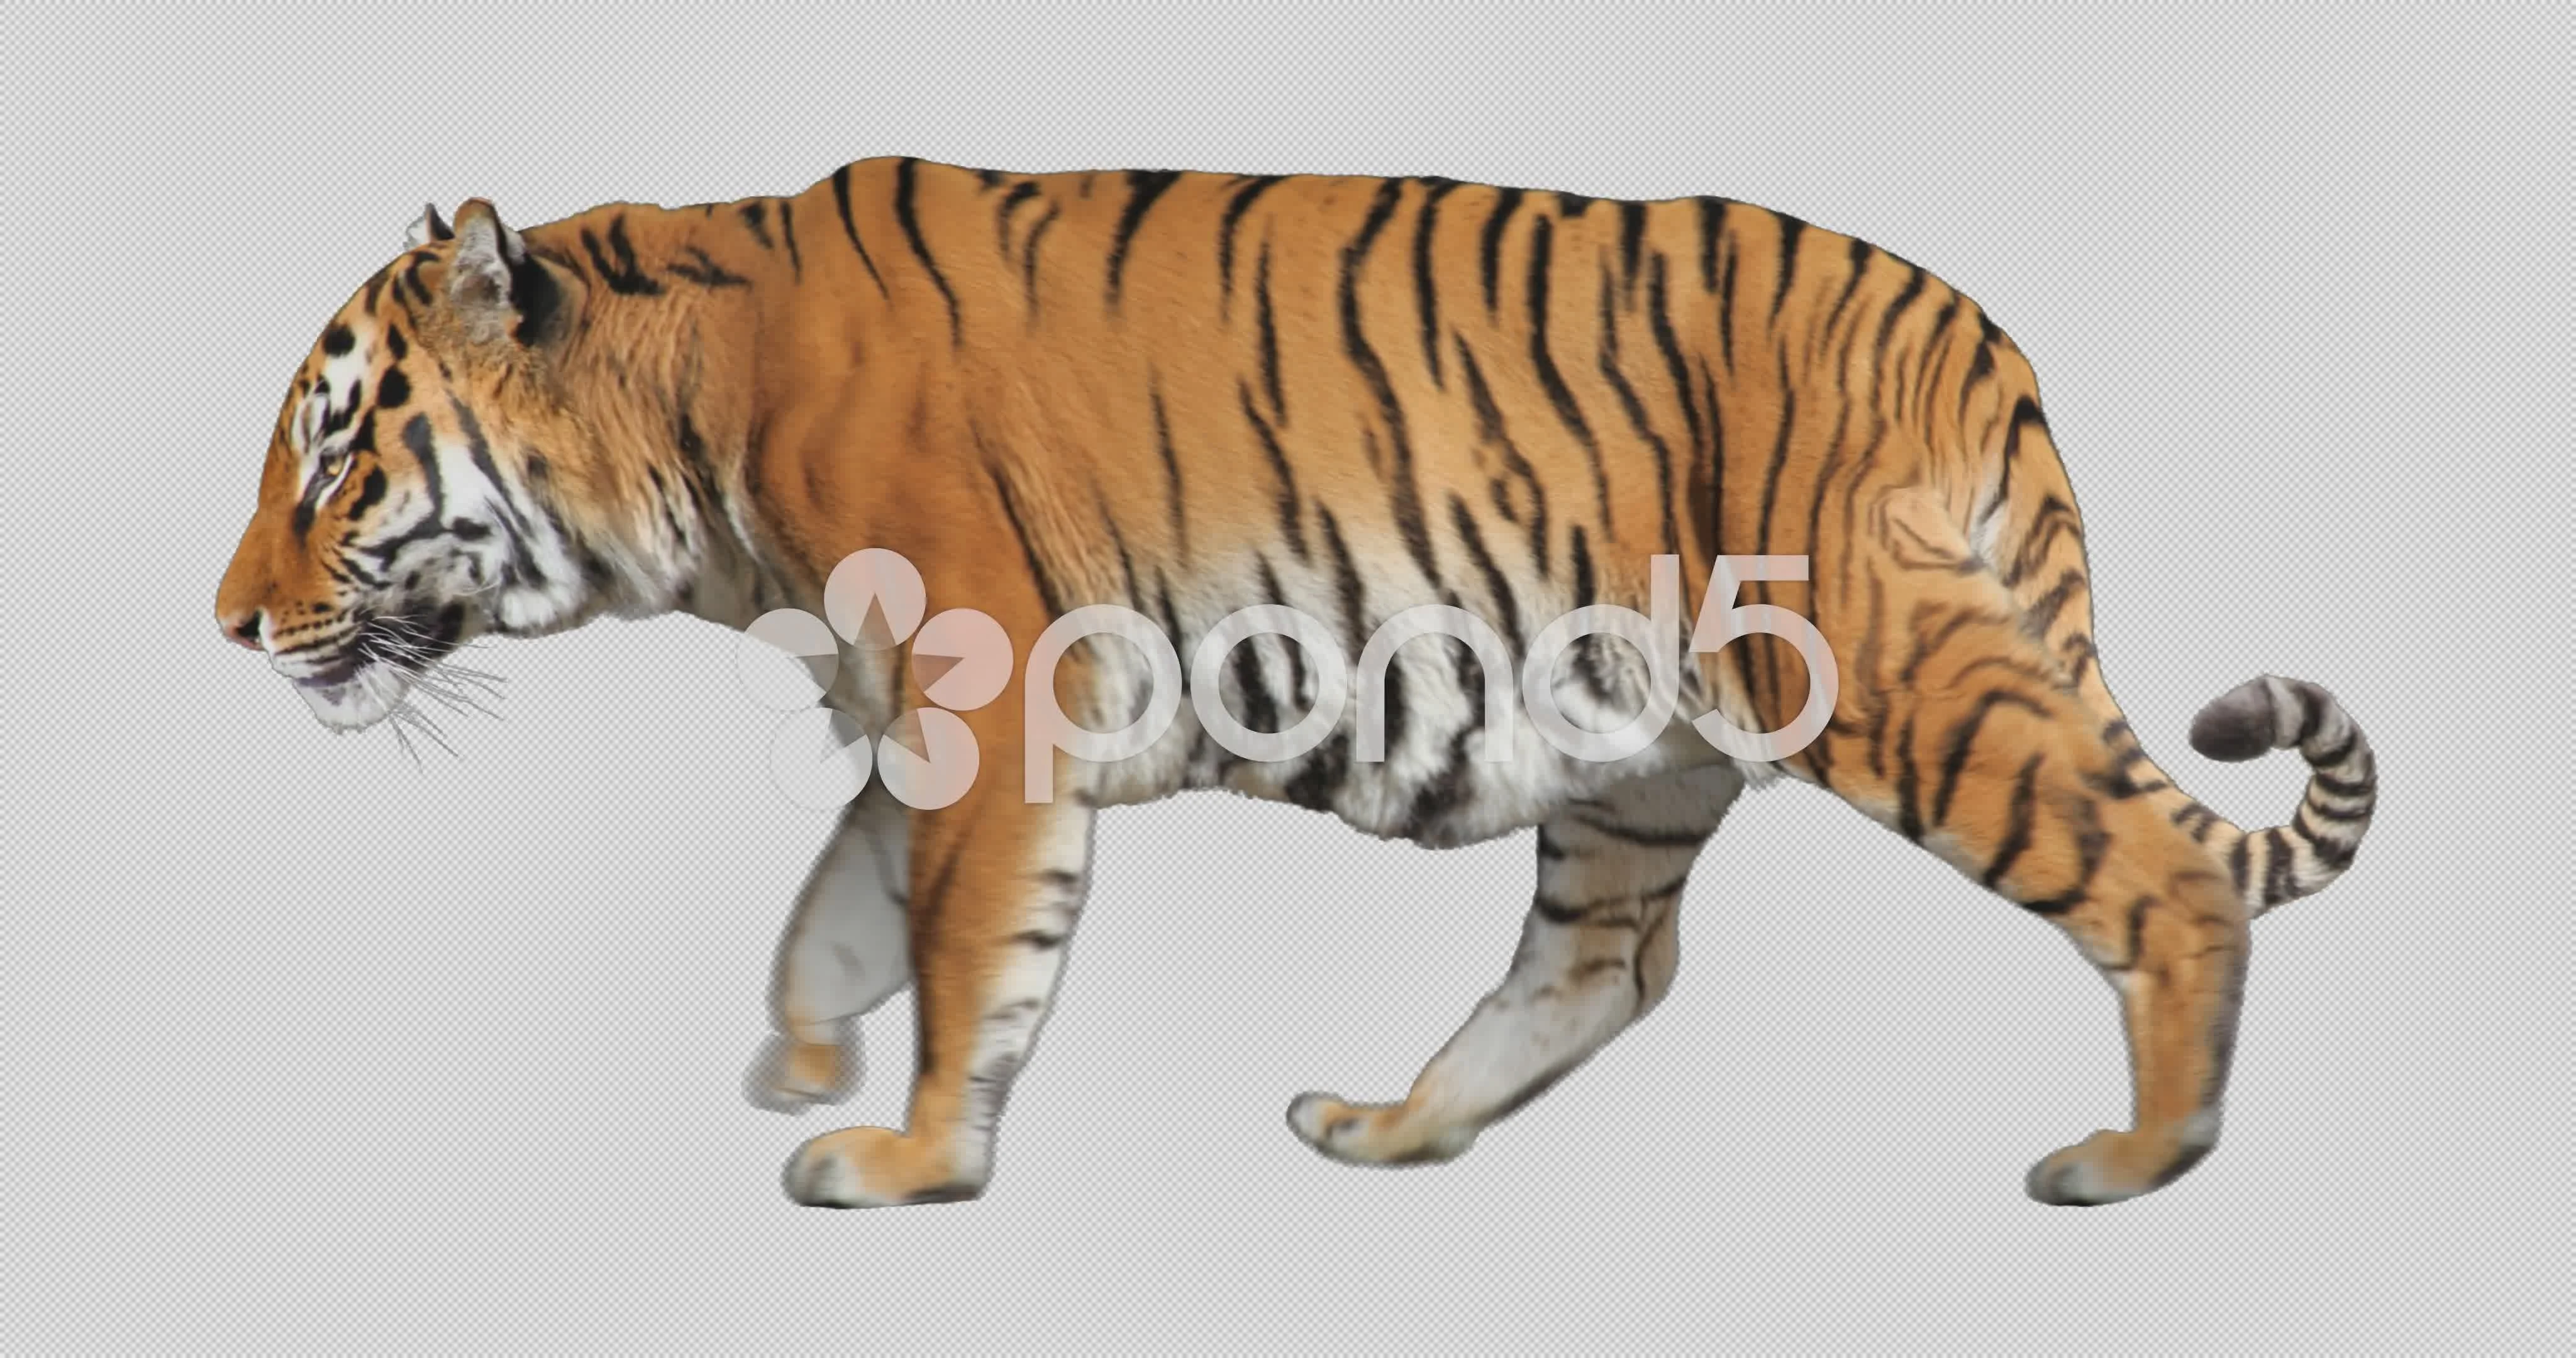 Tiger Walking. Isolated animal video inc... | Stock Video | Pond5